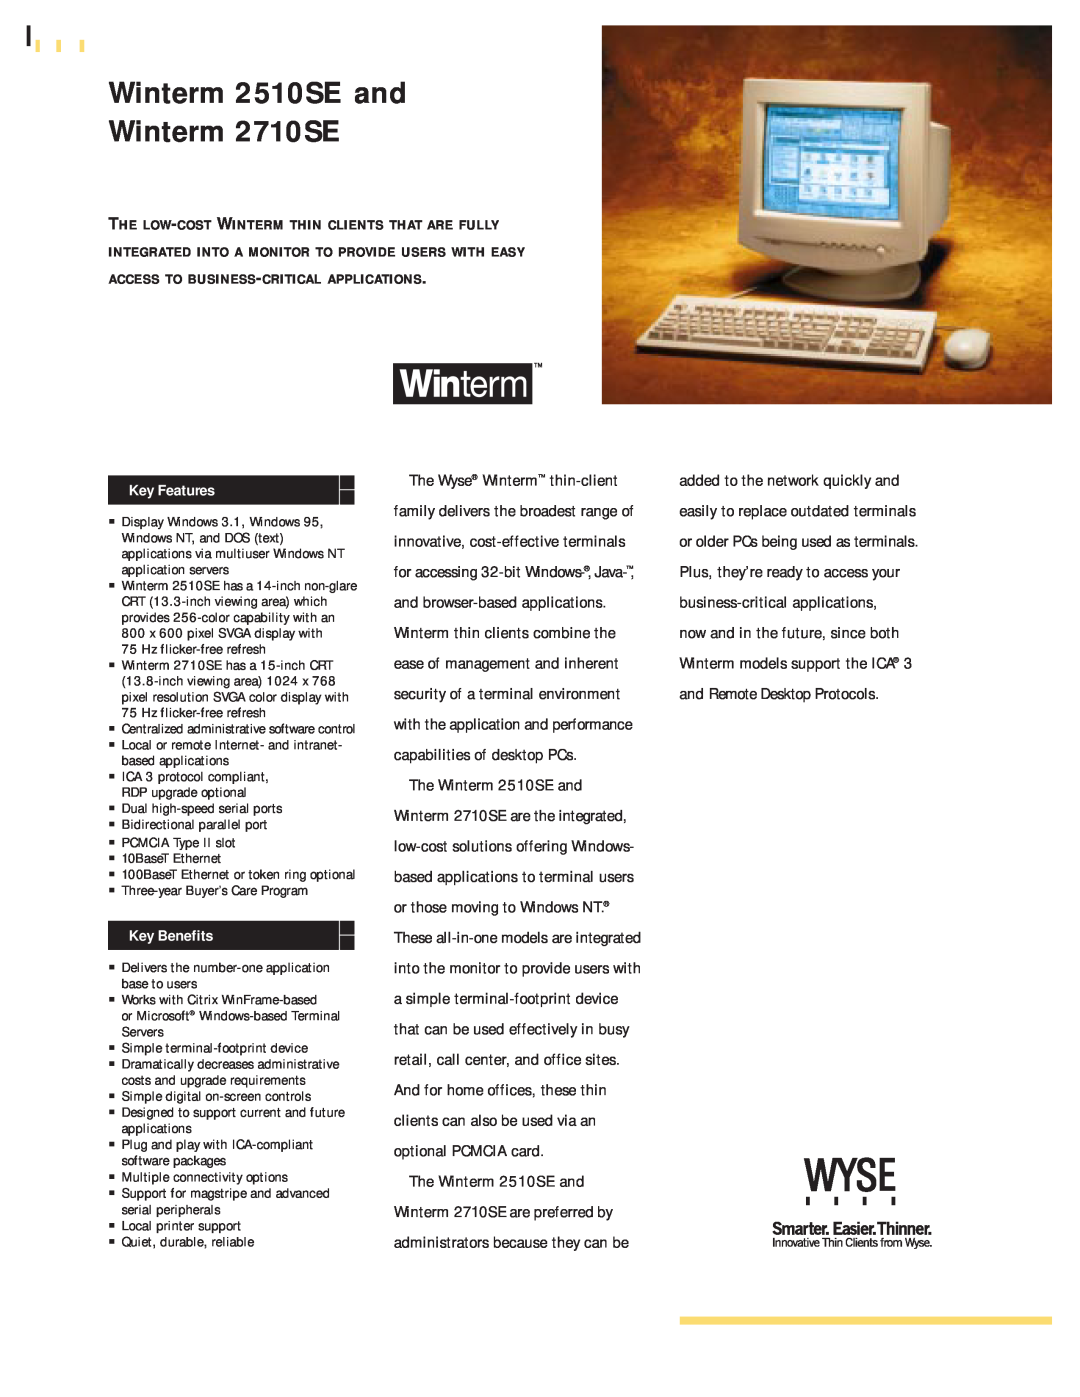 Wyse Technology manual Winterm 2510SE and Winterm 2710SE, Key Features, Key Benefits, The Wyse Winterm thin-client 